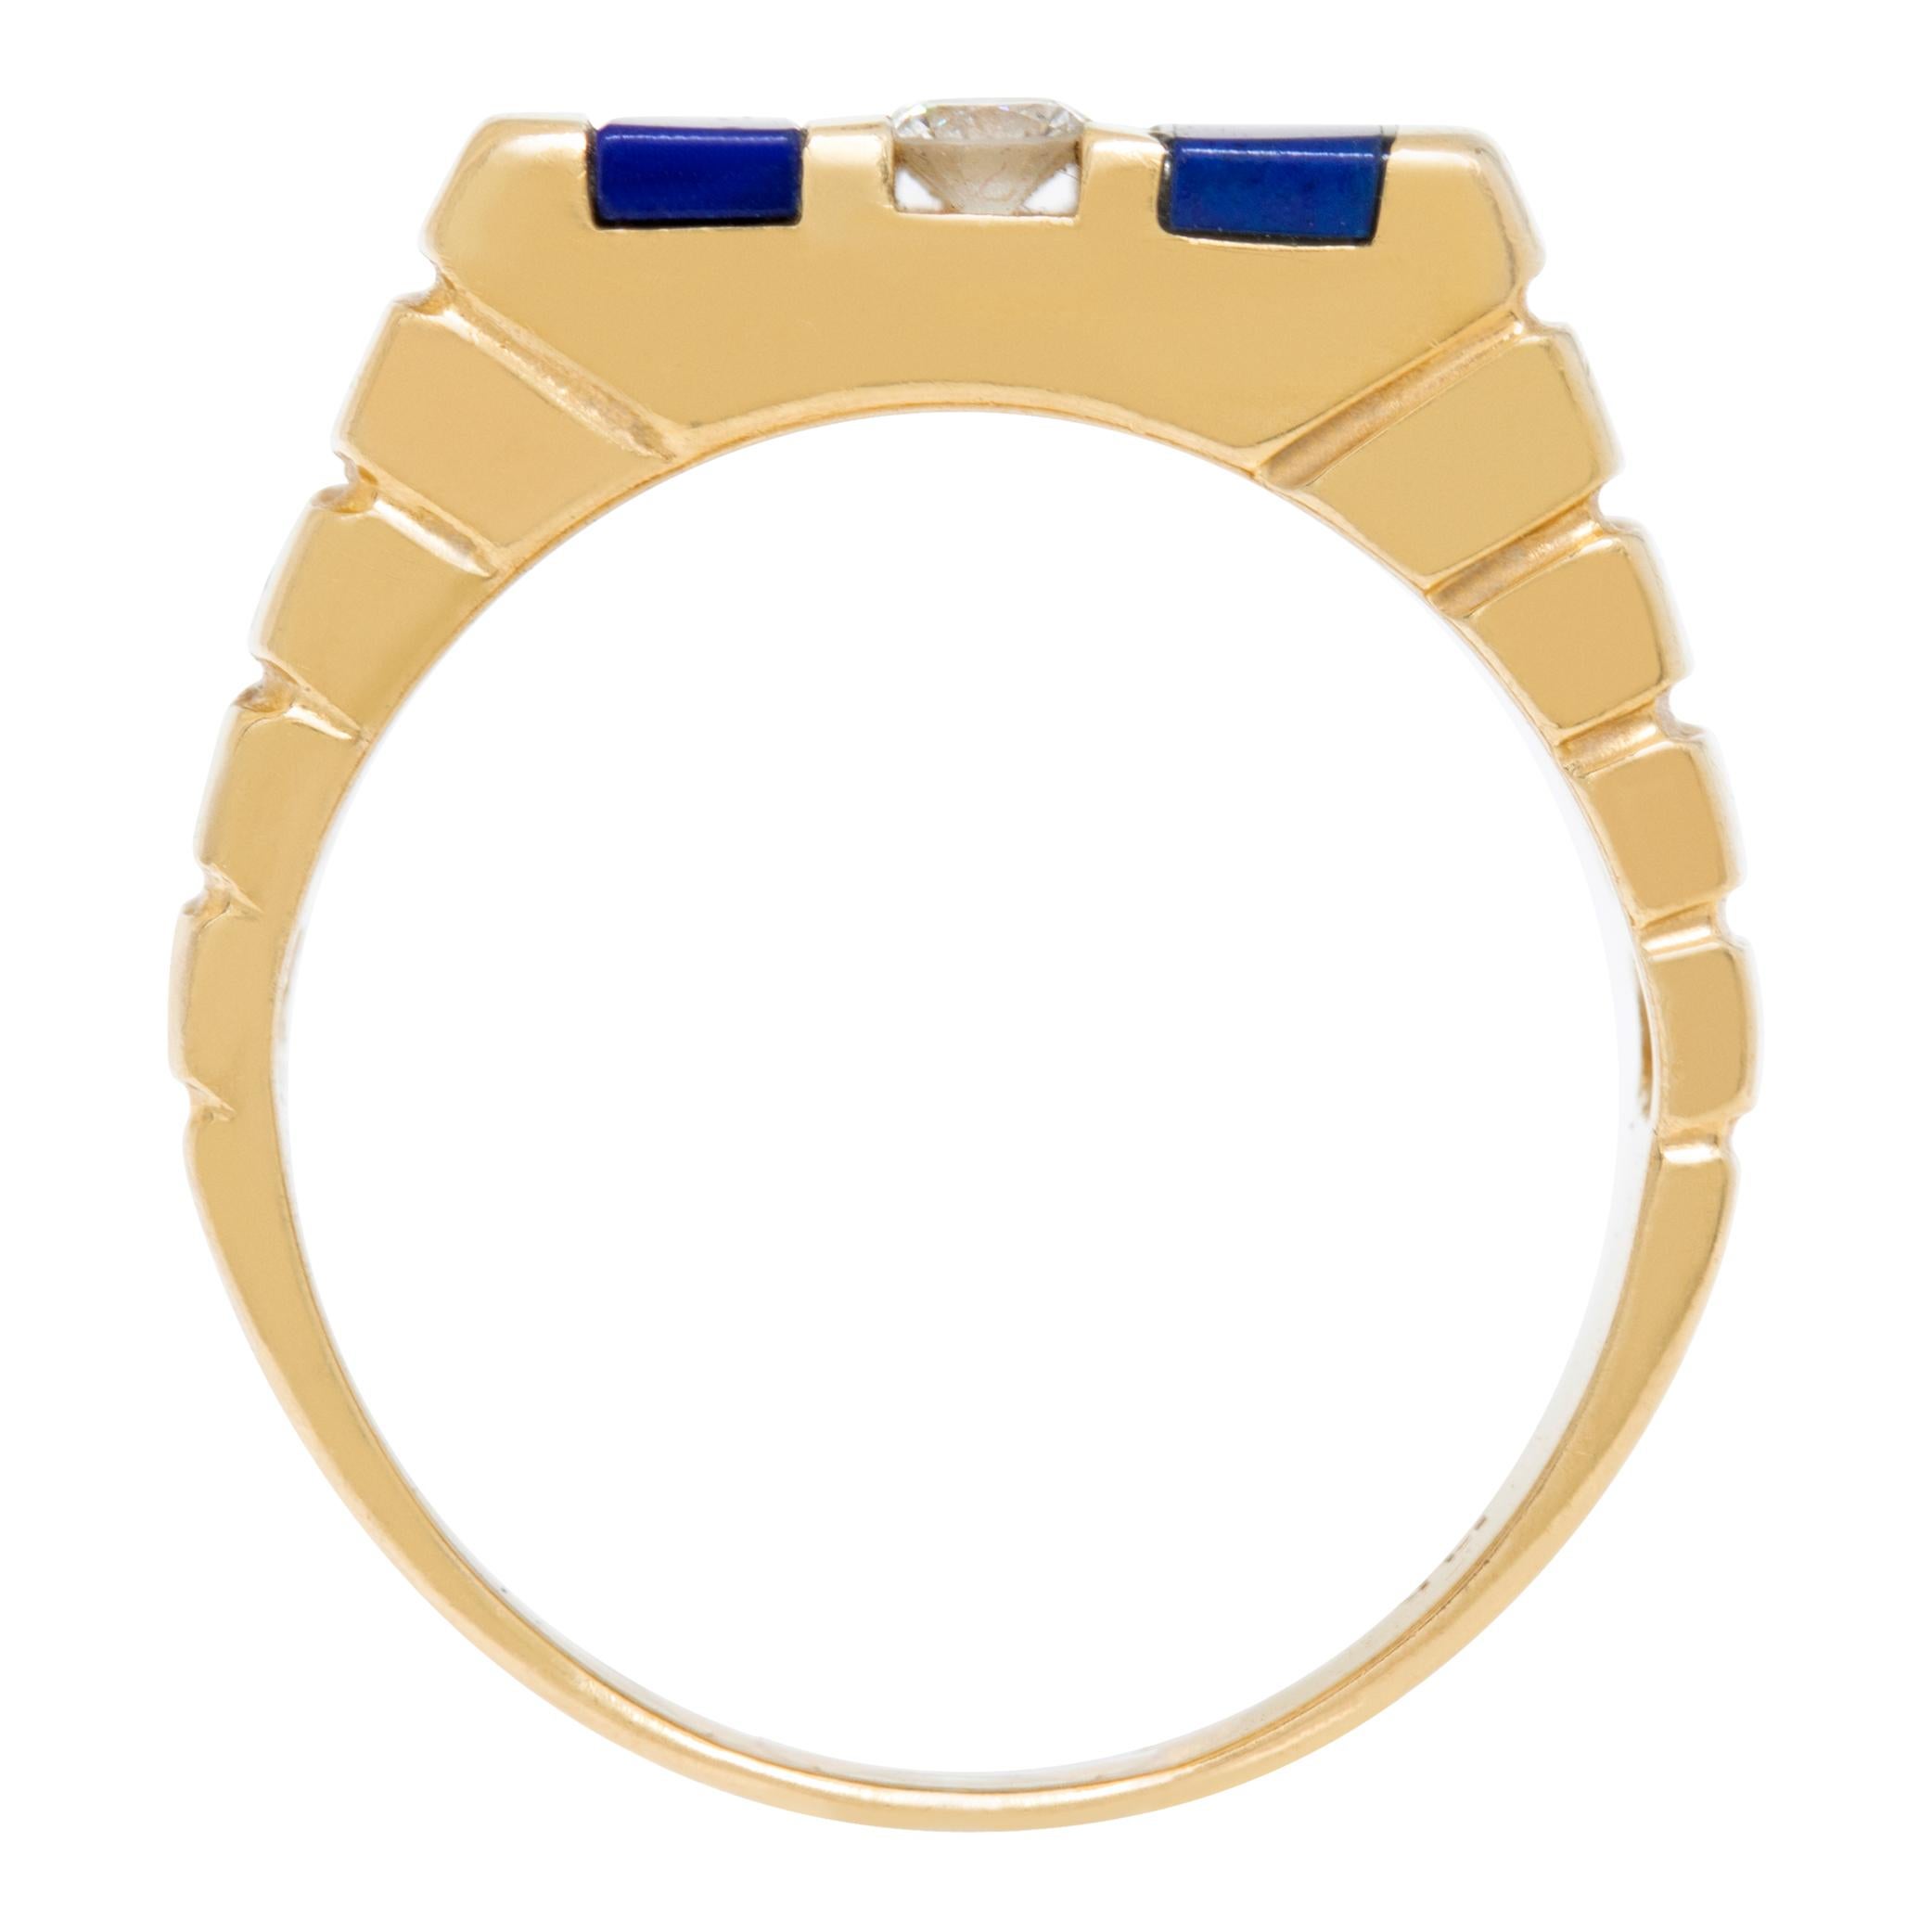 Men's Ribbed yellow gold ring with 3 channel set diamonds & lapiz lazuli accents.